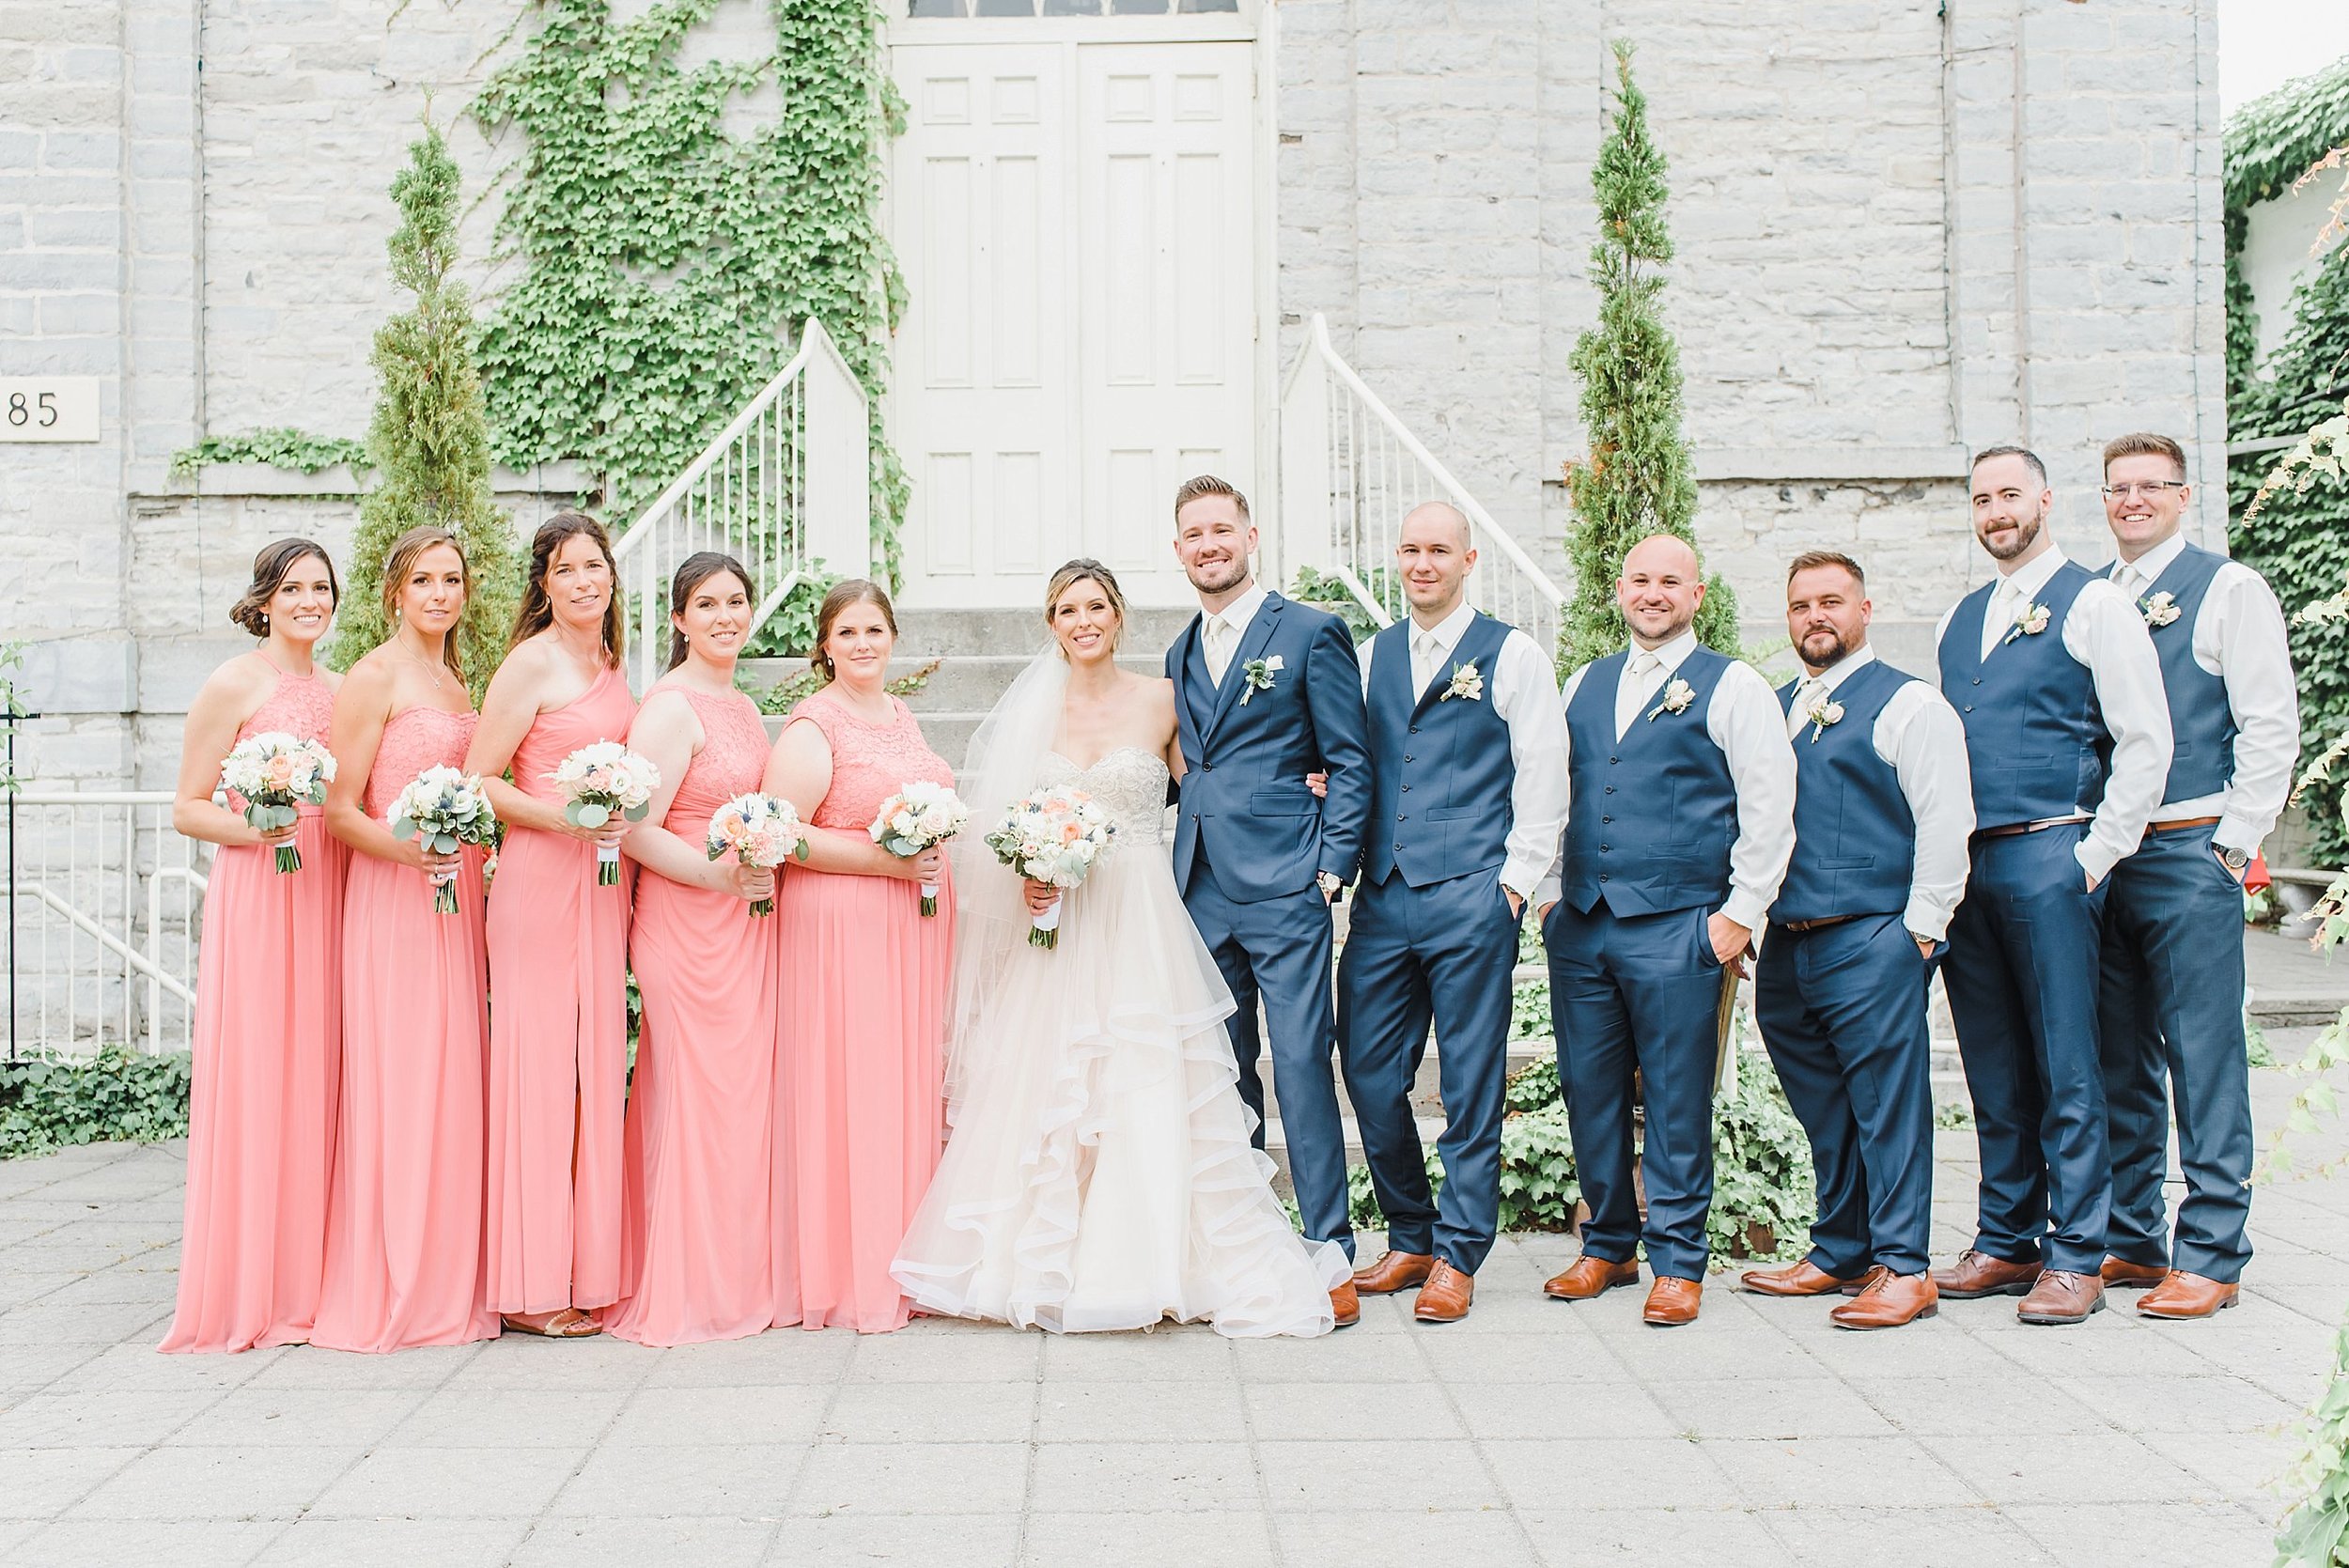  The rain started pouring a few minutes after the ceremony took place, so we took cover and went on over to the reception space, the Renaissance Events Venue, where the rain decided to hold off a little longer for bridal party portraits! 